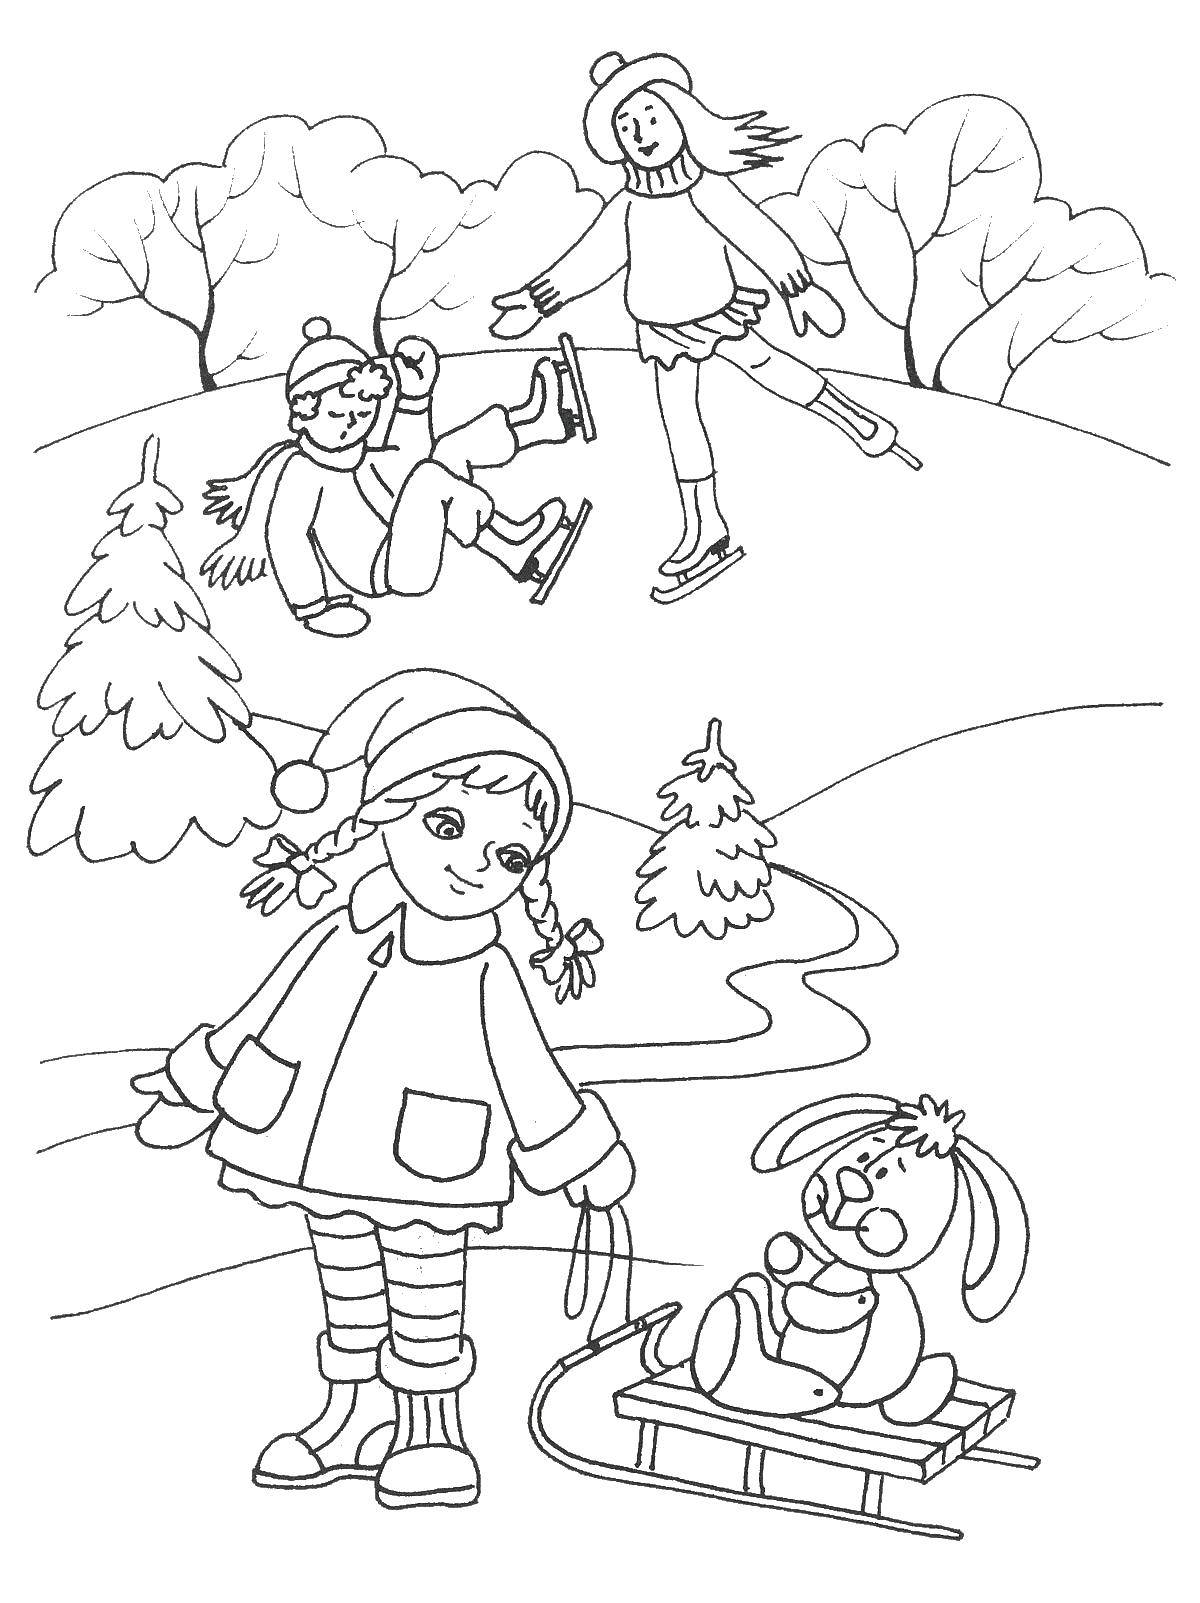 Coloring Winter plays children. Category coloring winter. Tags:  children, winter, sleigh.